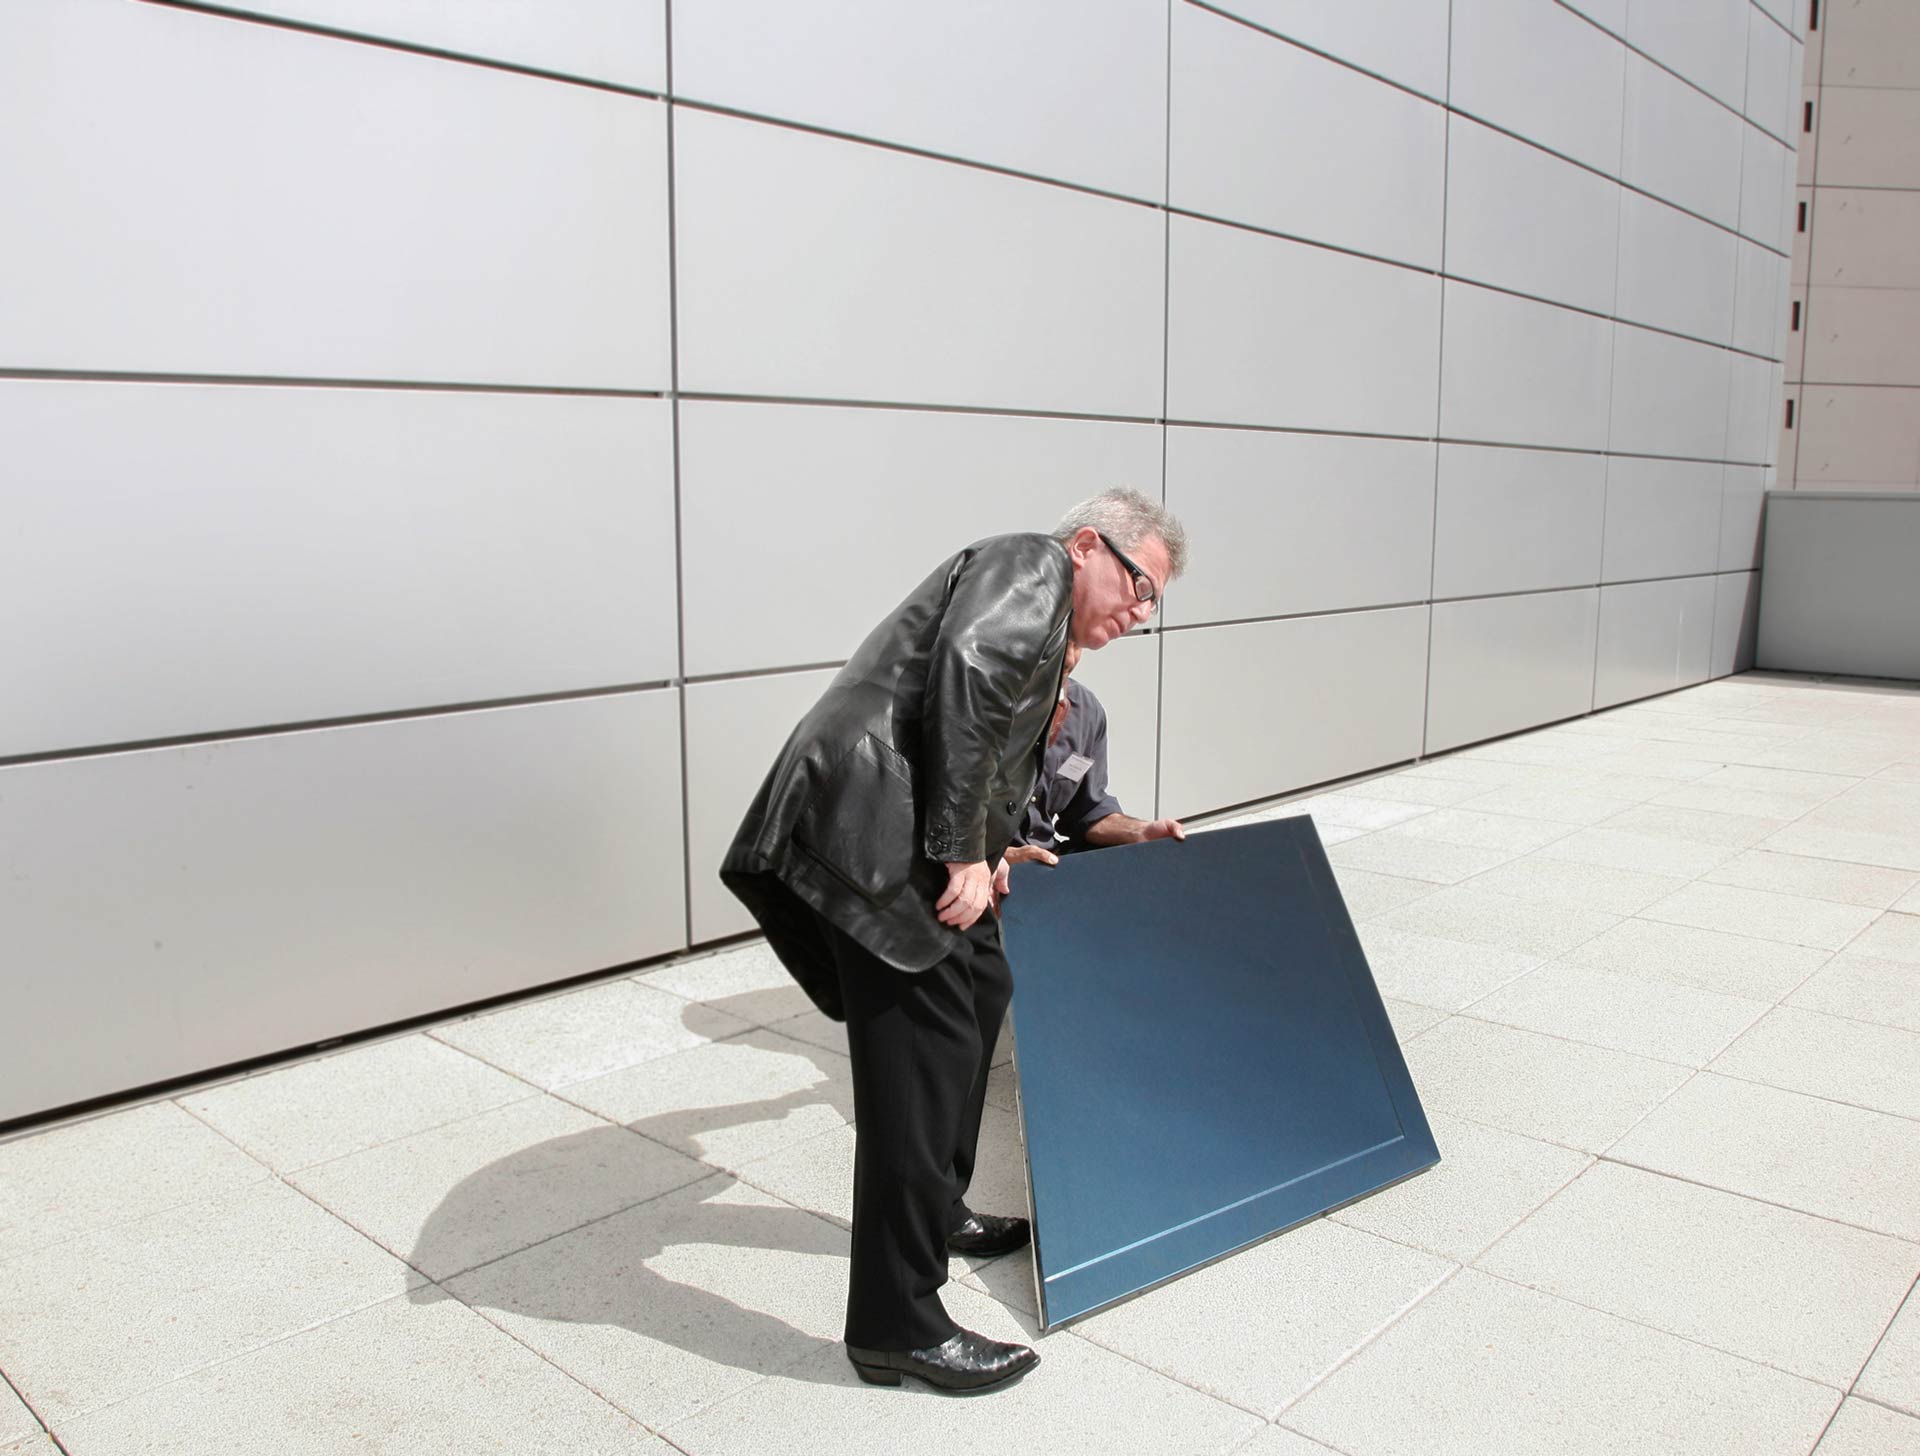 DANIEL LIBESKIND EXAMINES THE LIGHT REFLECTIVITY OF ONE OF ZAHNER'S PANELS AT THE CONTEMPORARY JEWISH MUSEUM IN SAN FRANCISCO.